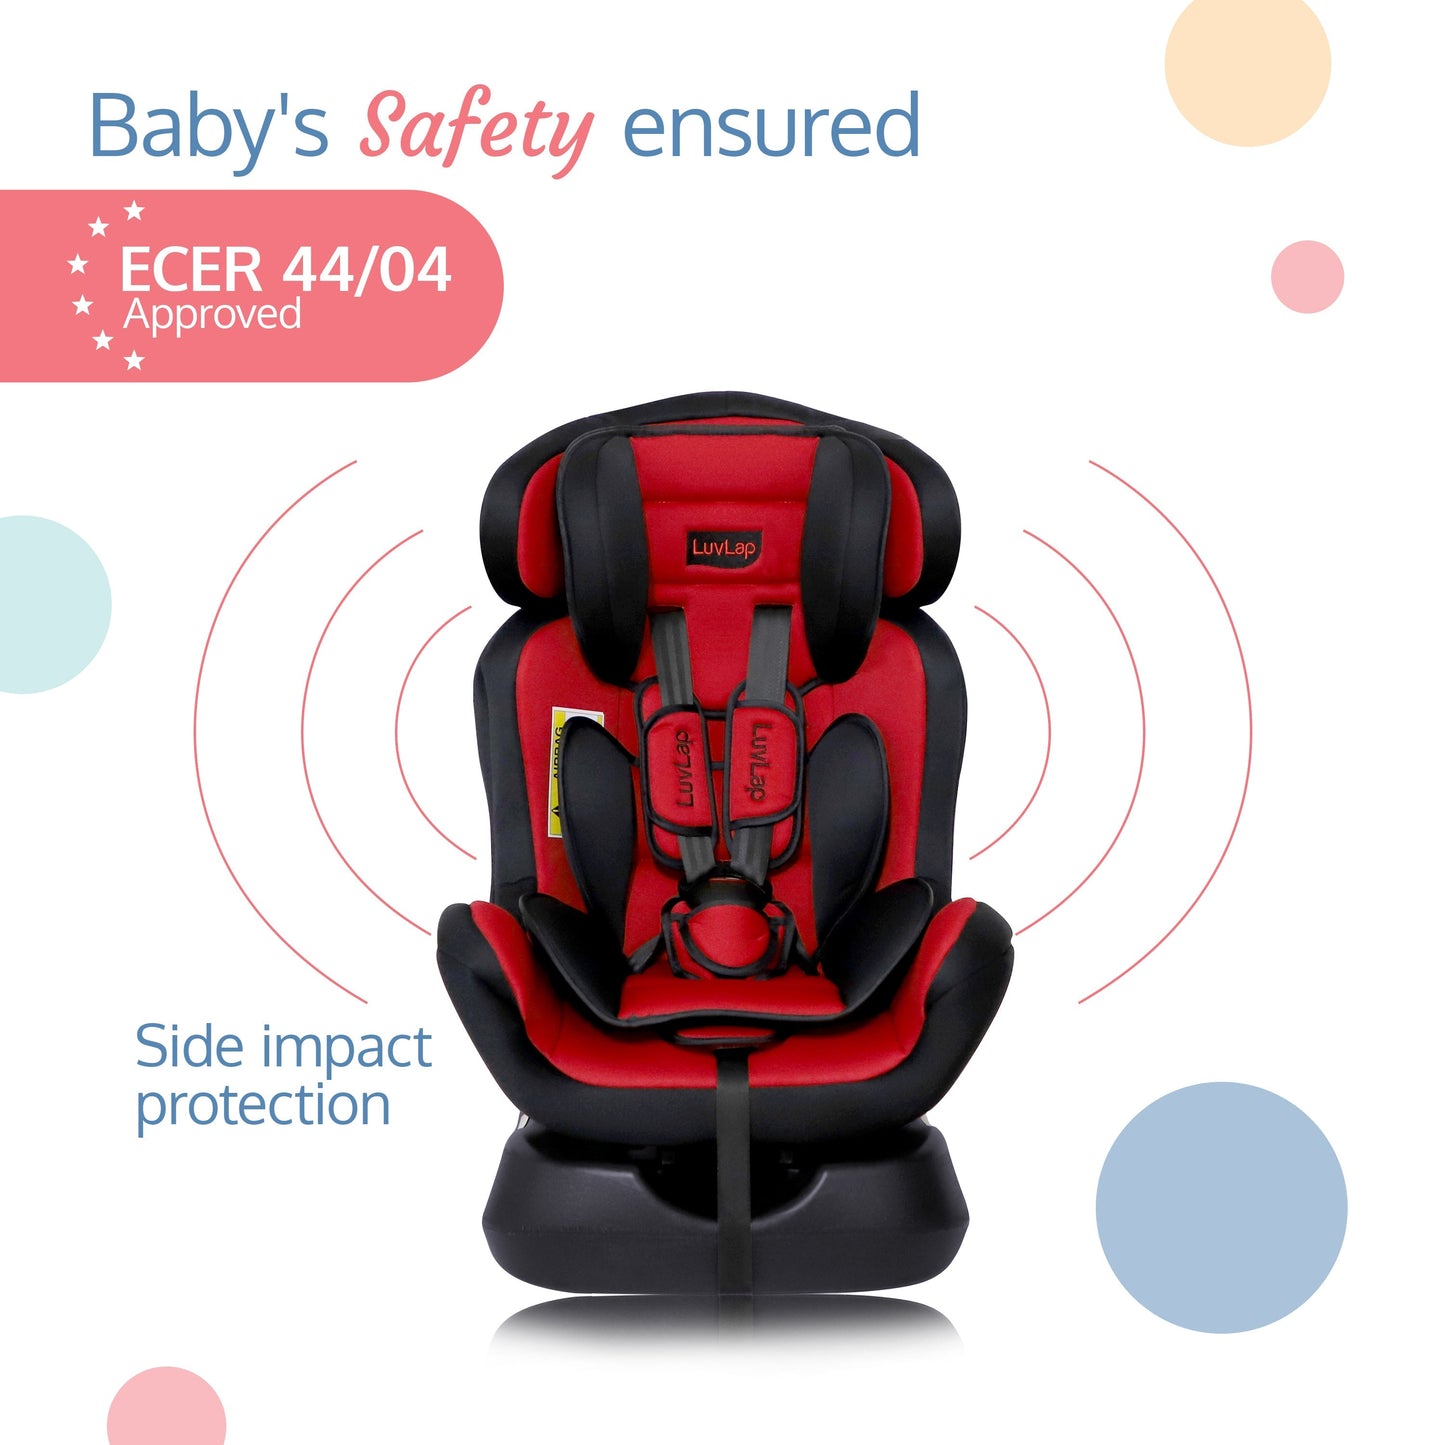 Galaxy Convertible Car Seat (Red)